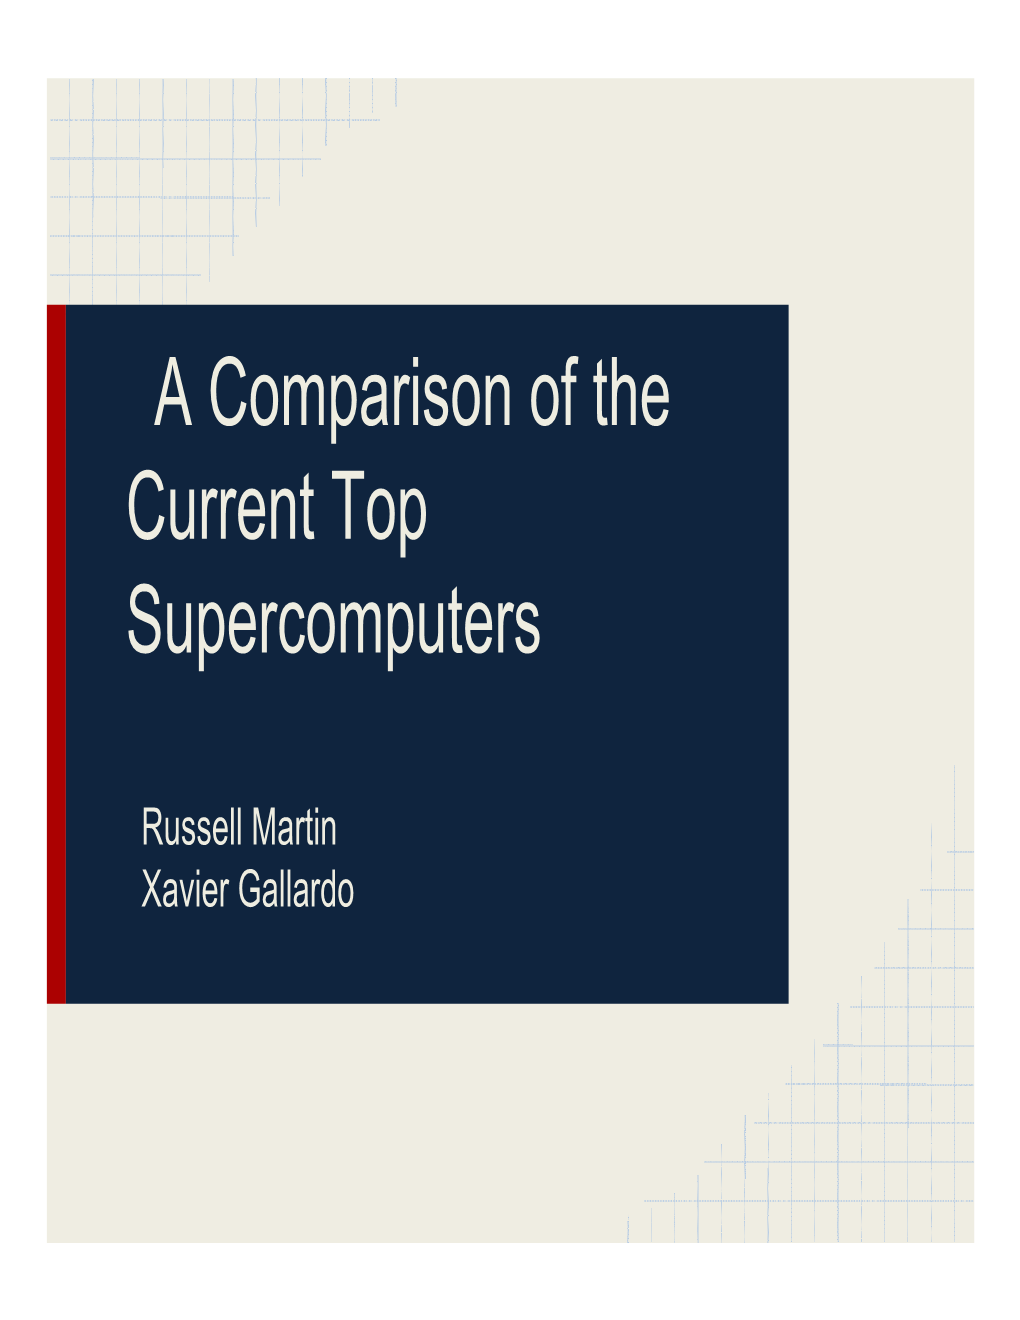 A Comparison of the Current Top Supercomputers